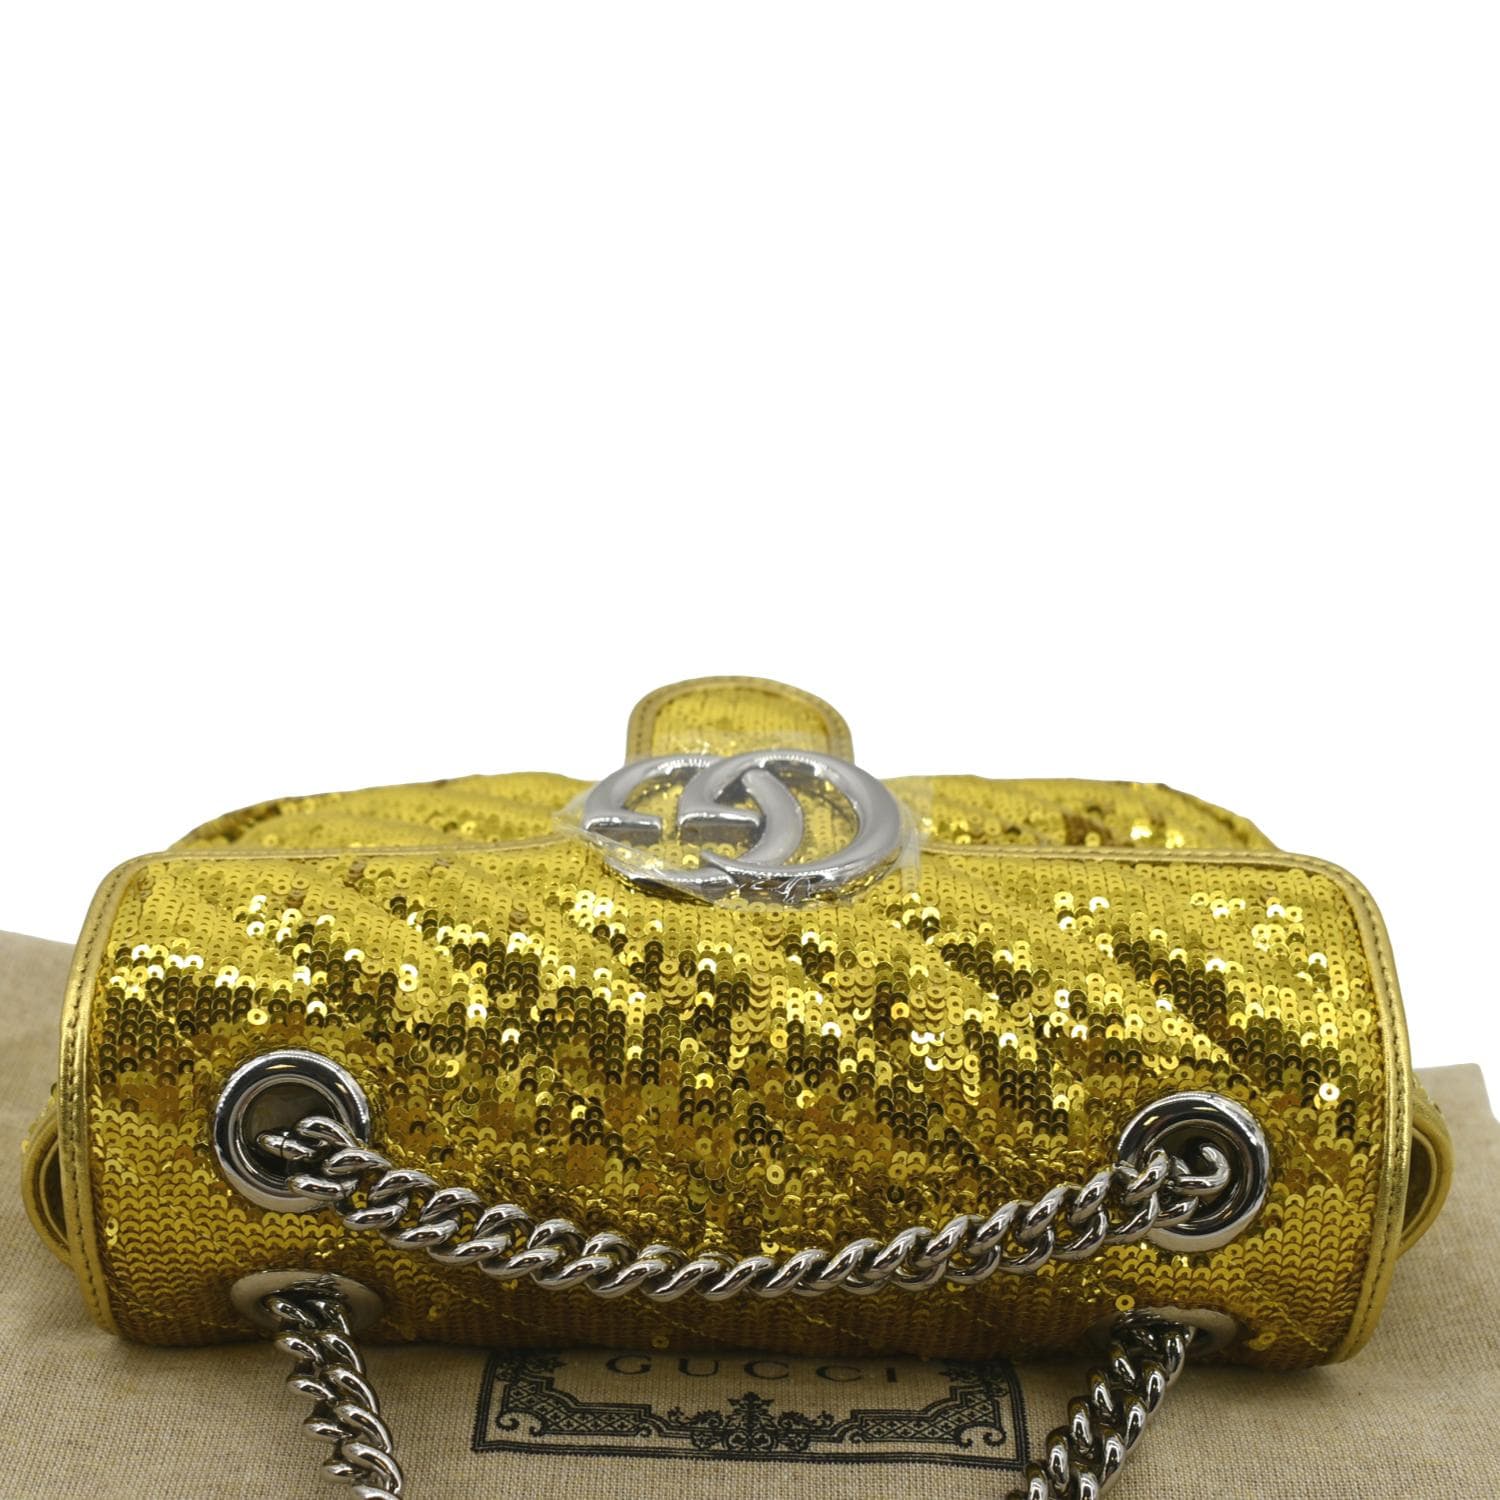 The Pouch mini sequined leather clutch